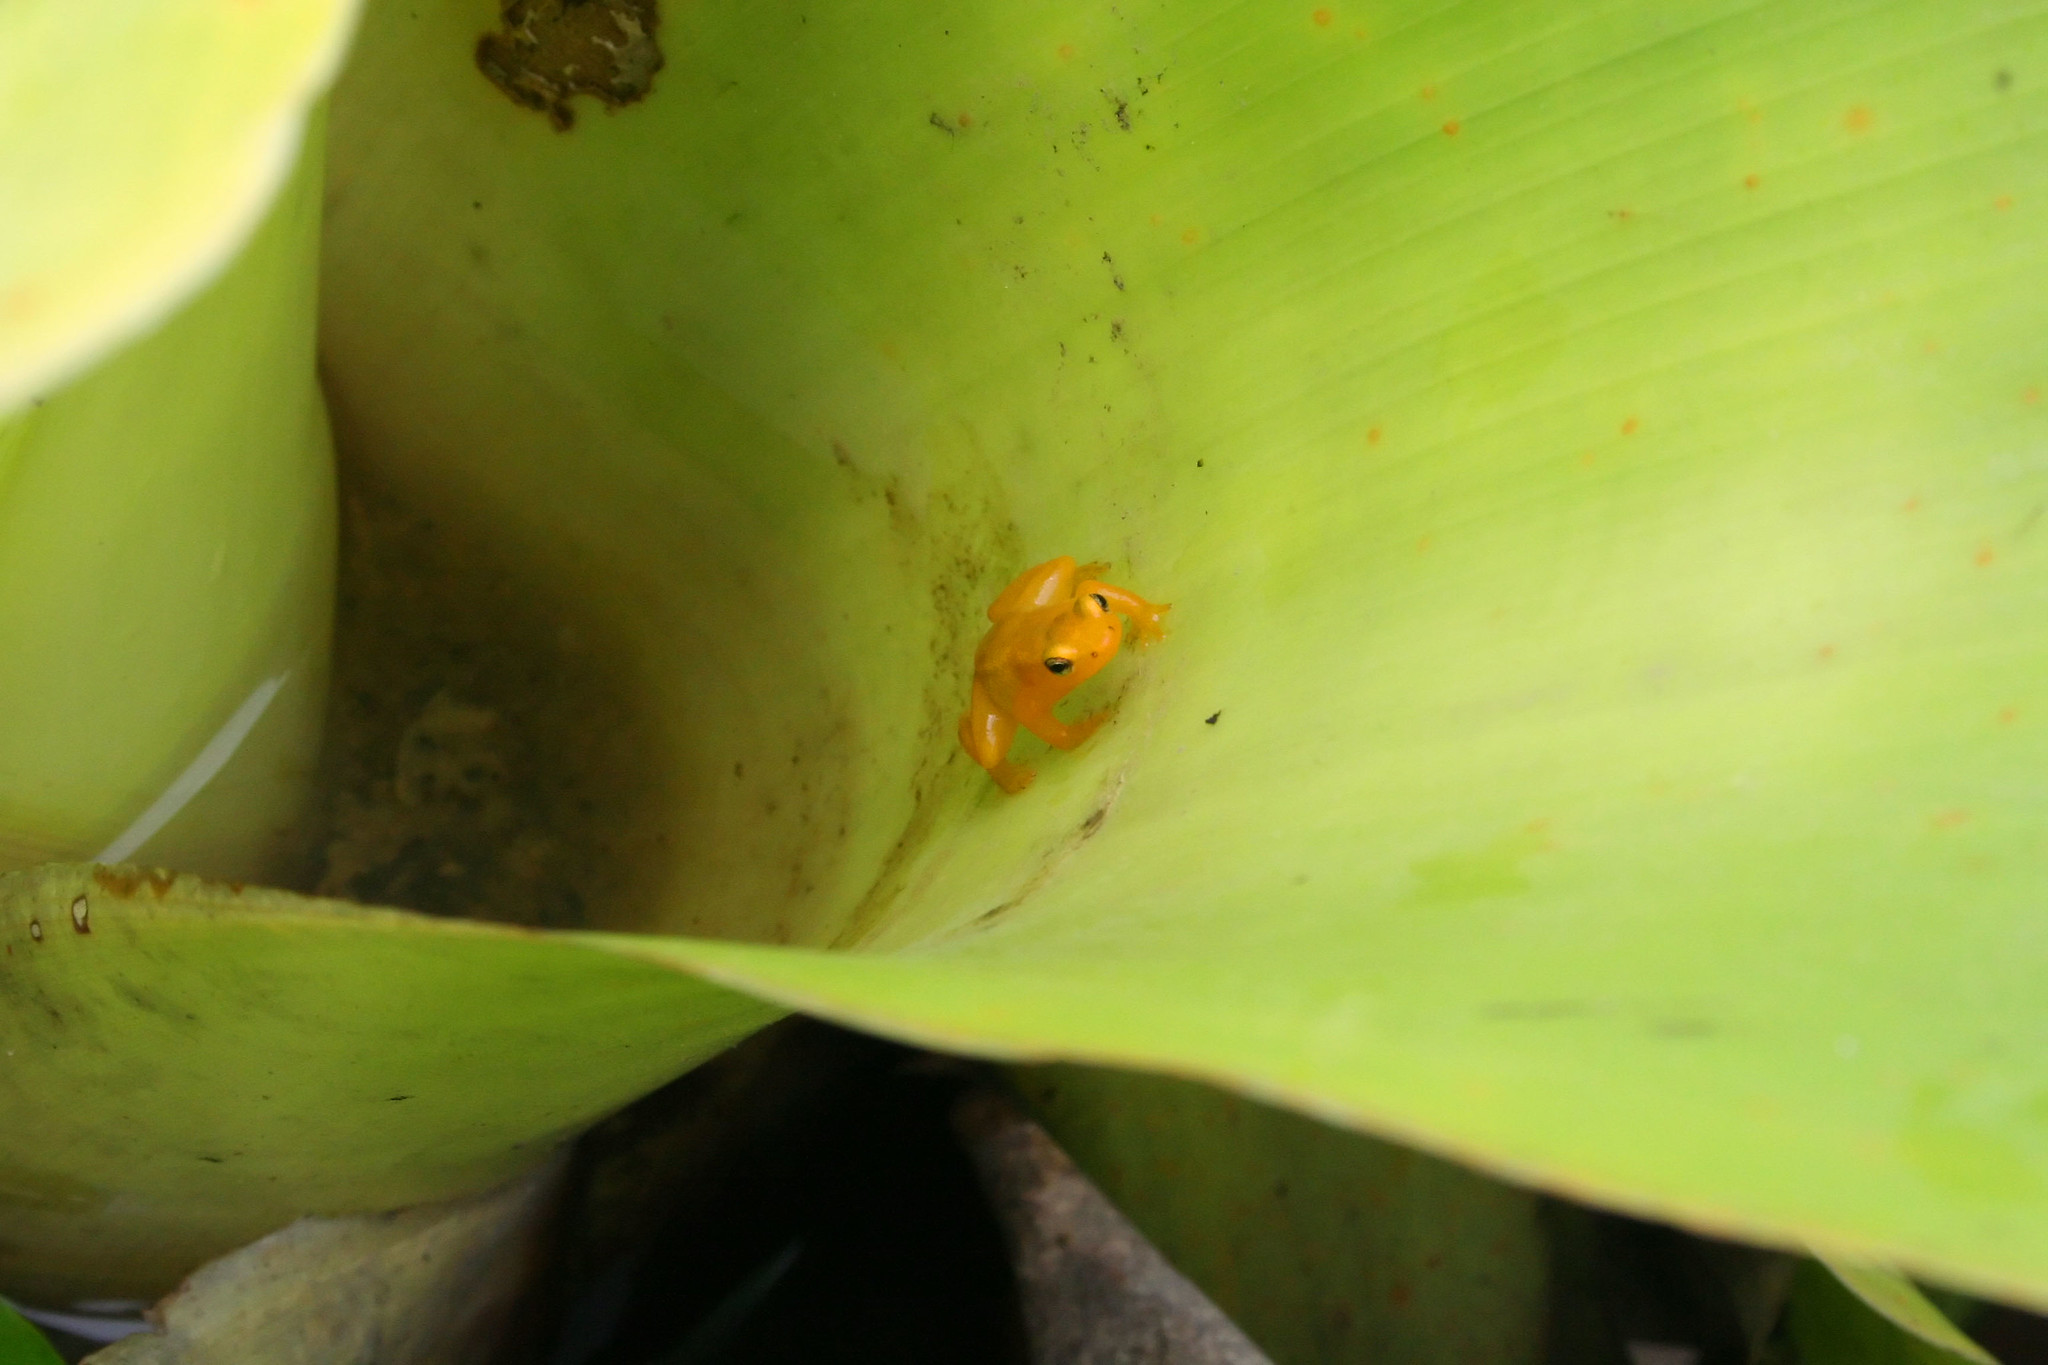 A tiny orange frog sitting by a pool of water inside the leaf of a bromeliad plant.